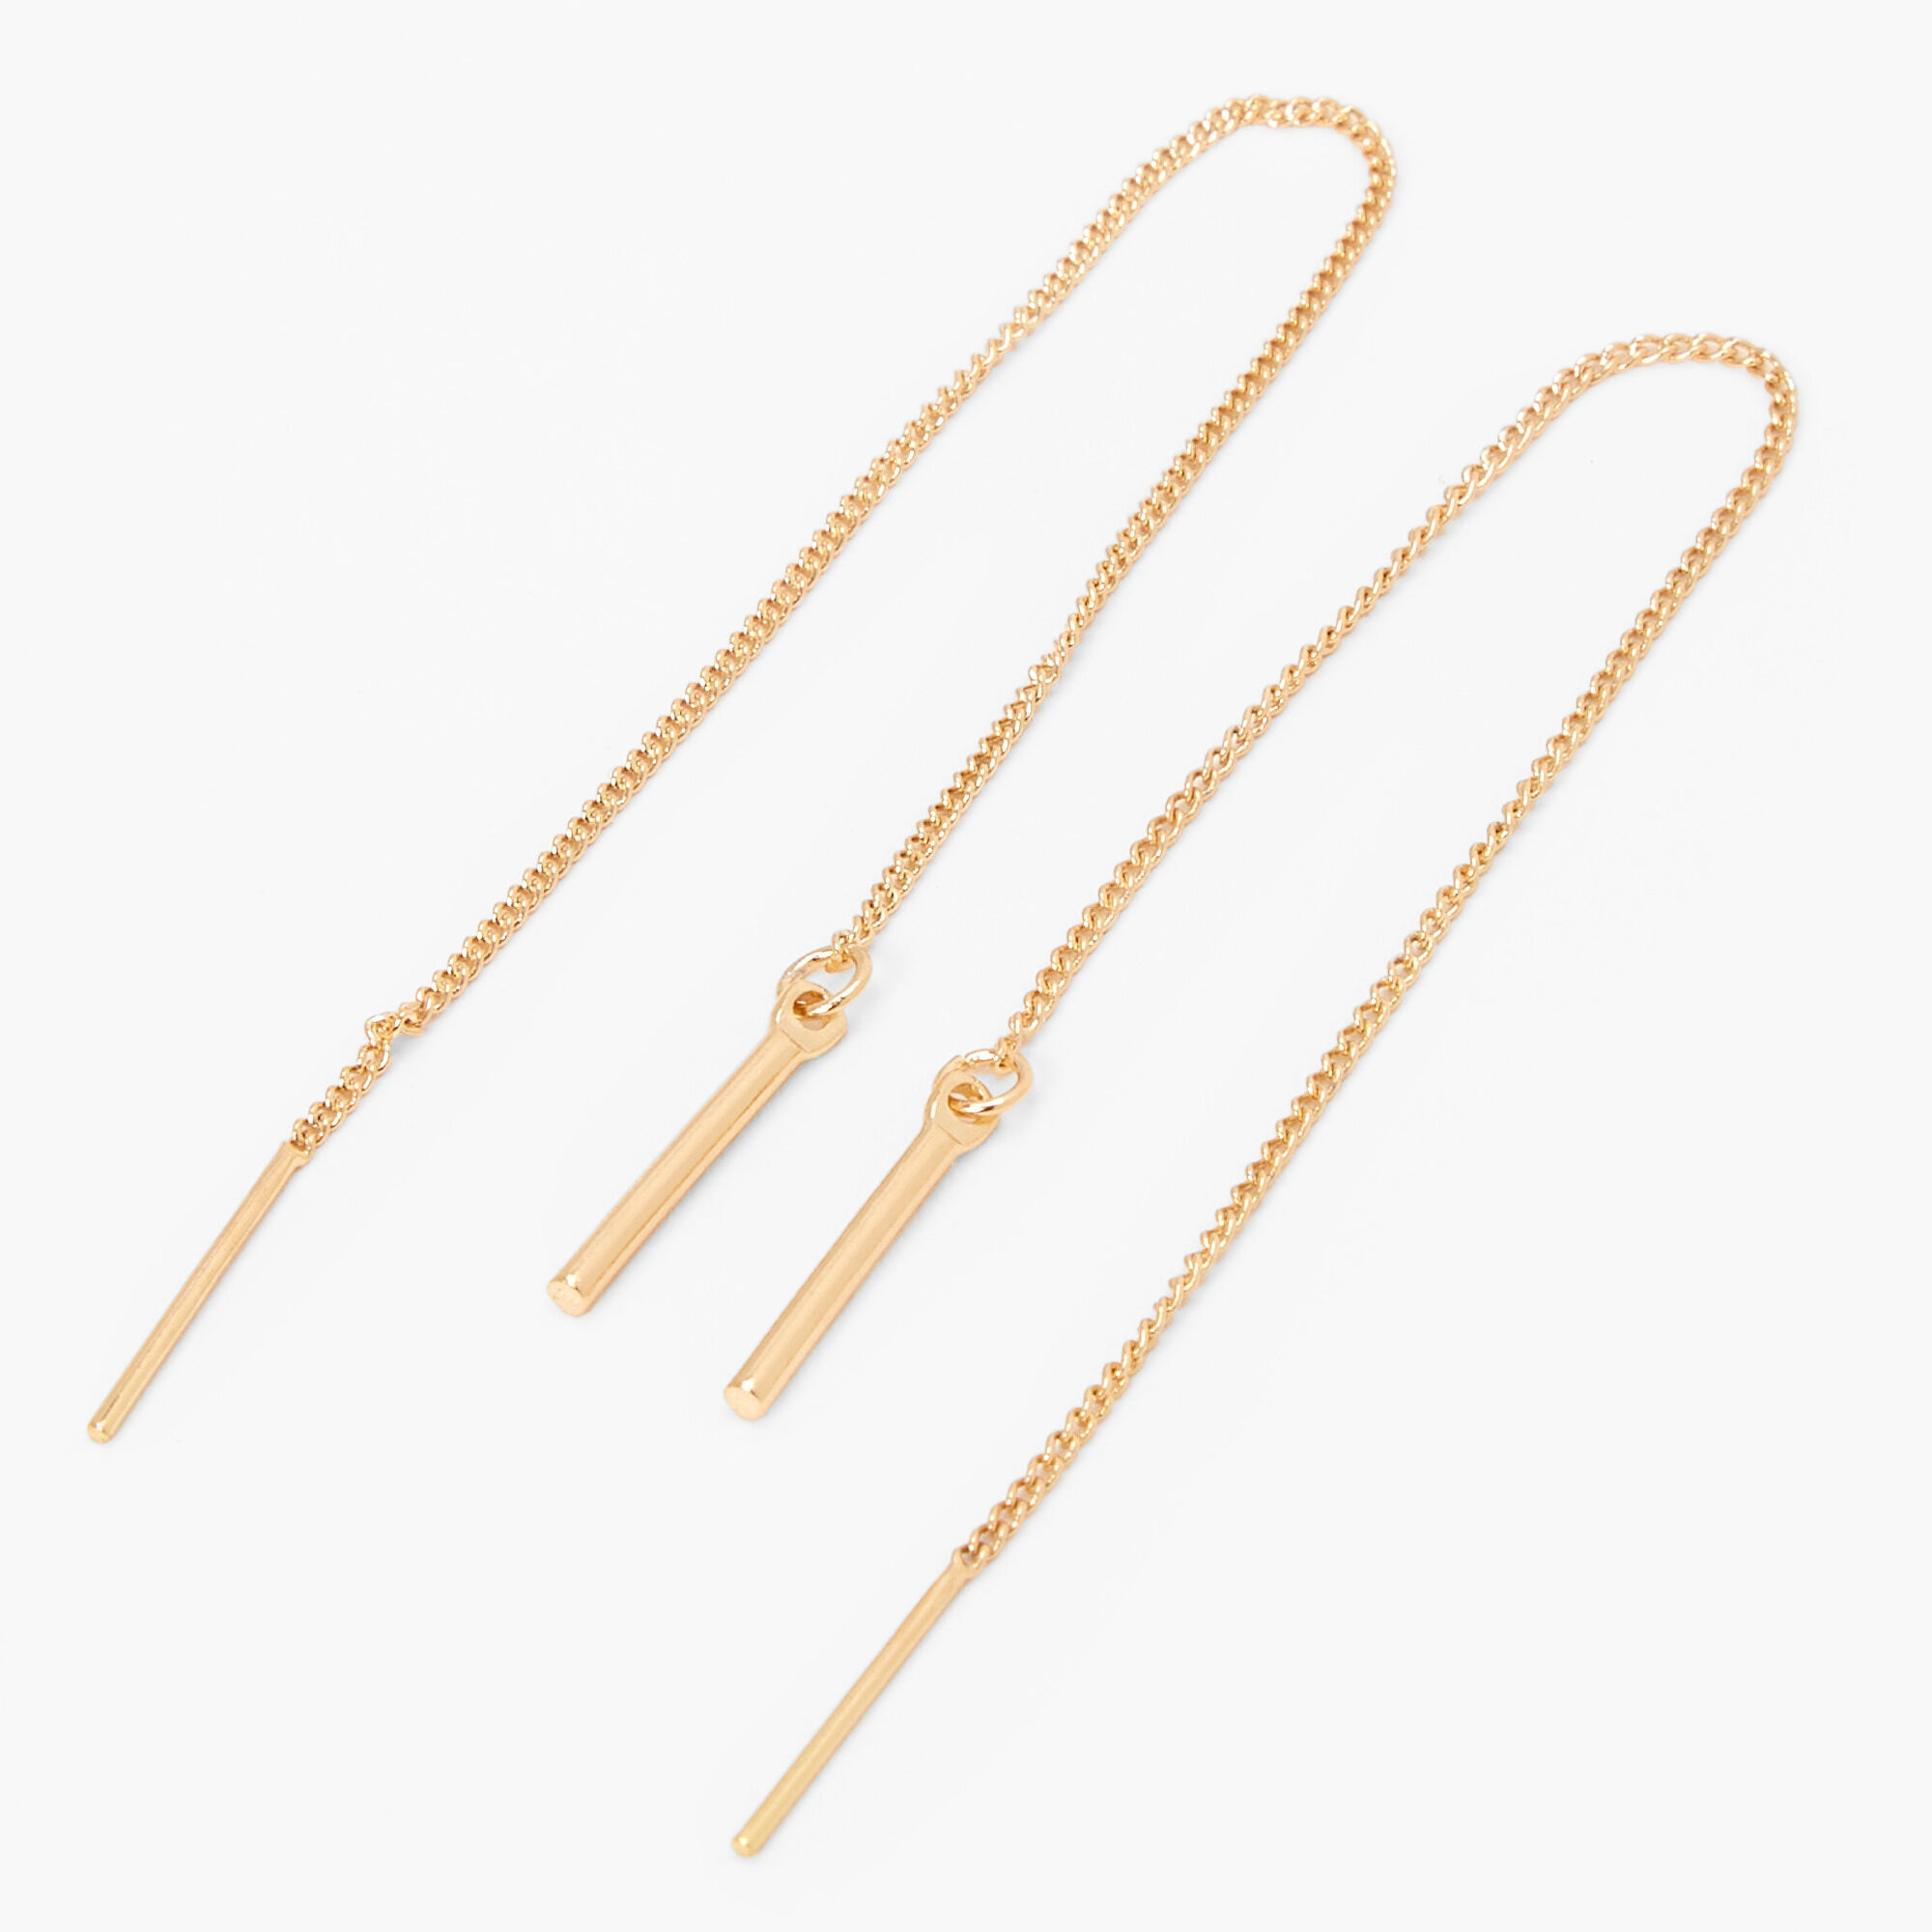 View Claires Tone 4 Linear Bar Threader Drop Earrings Gold information